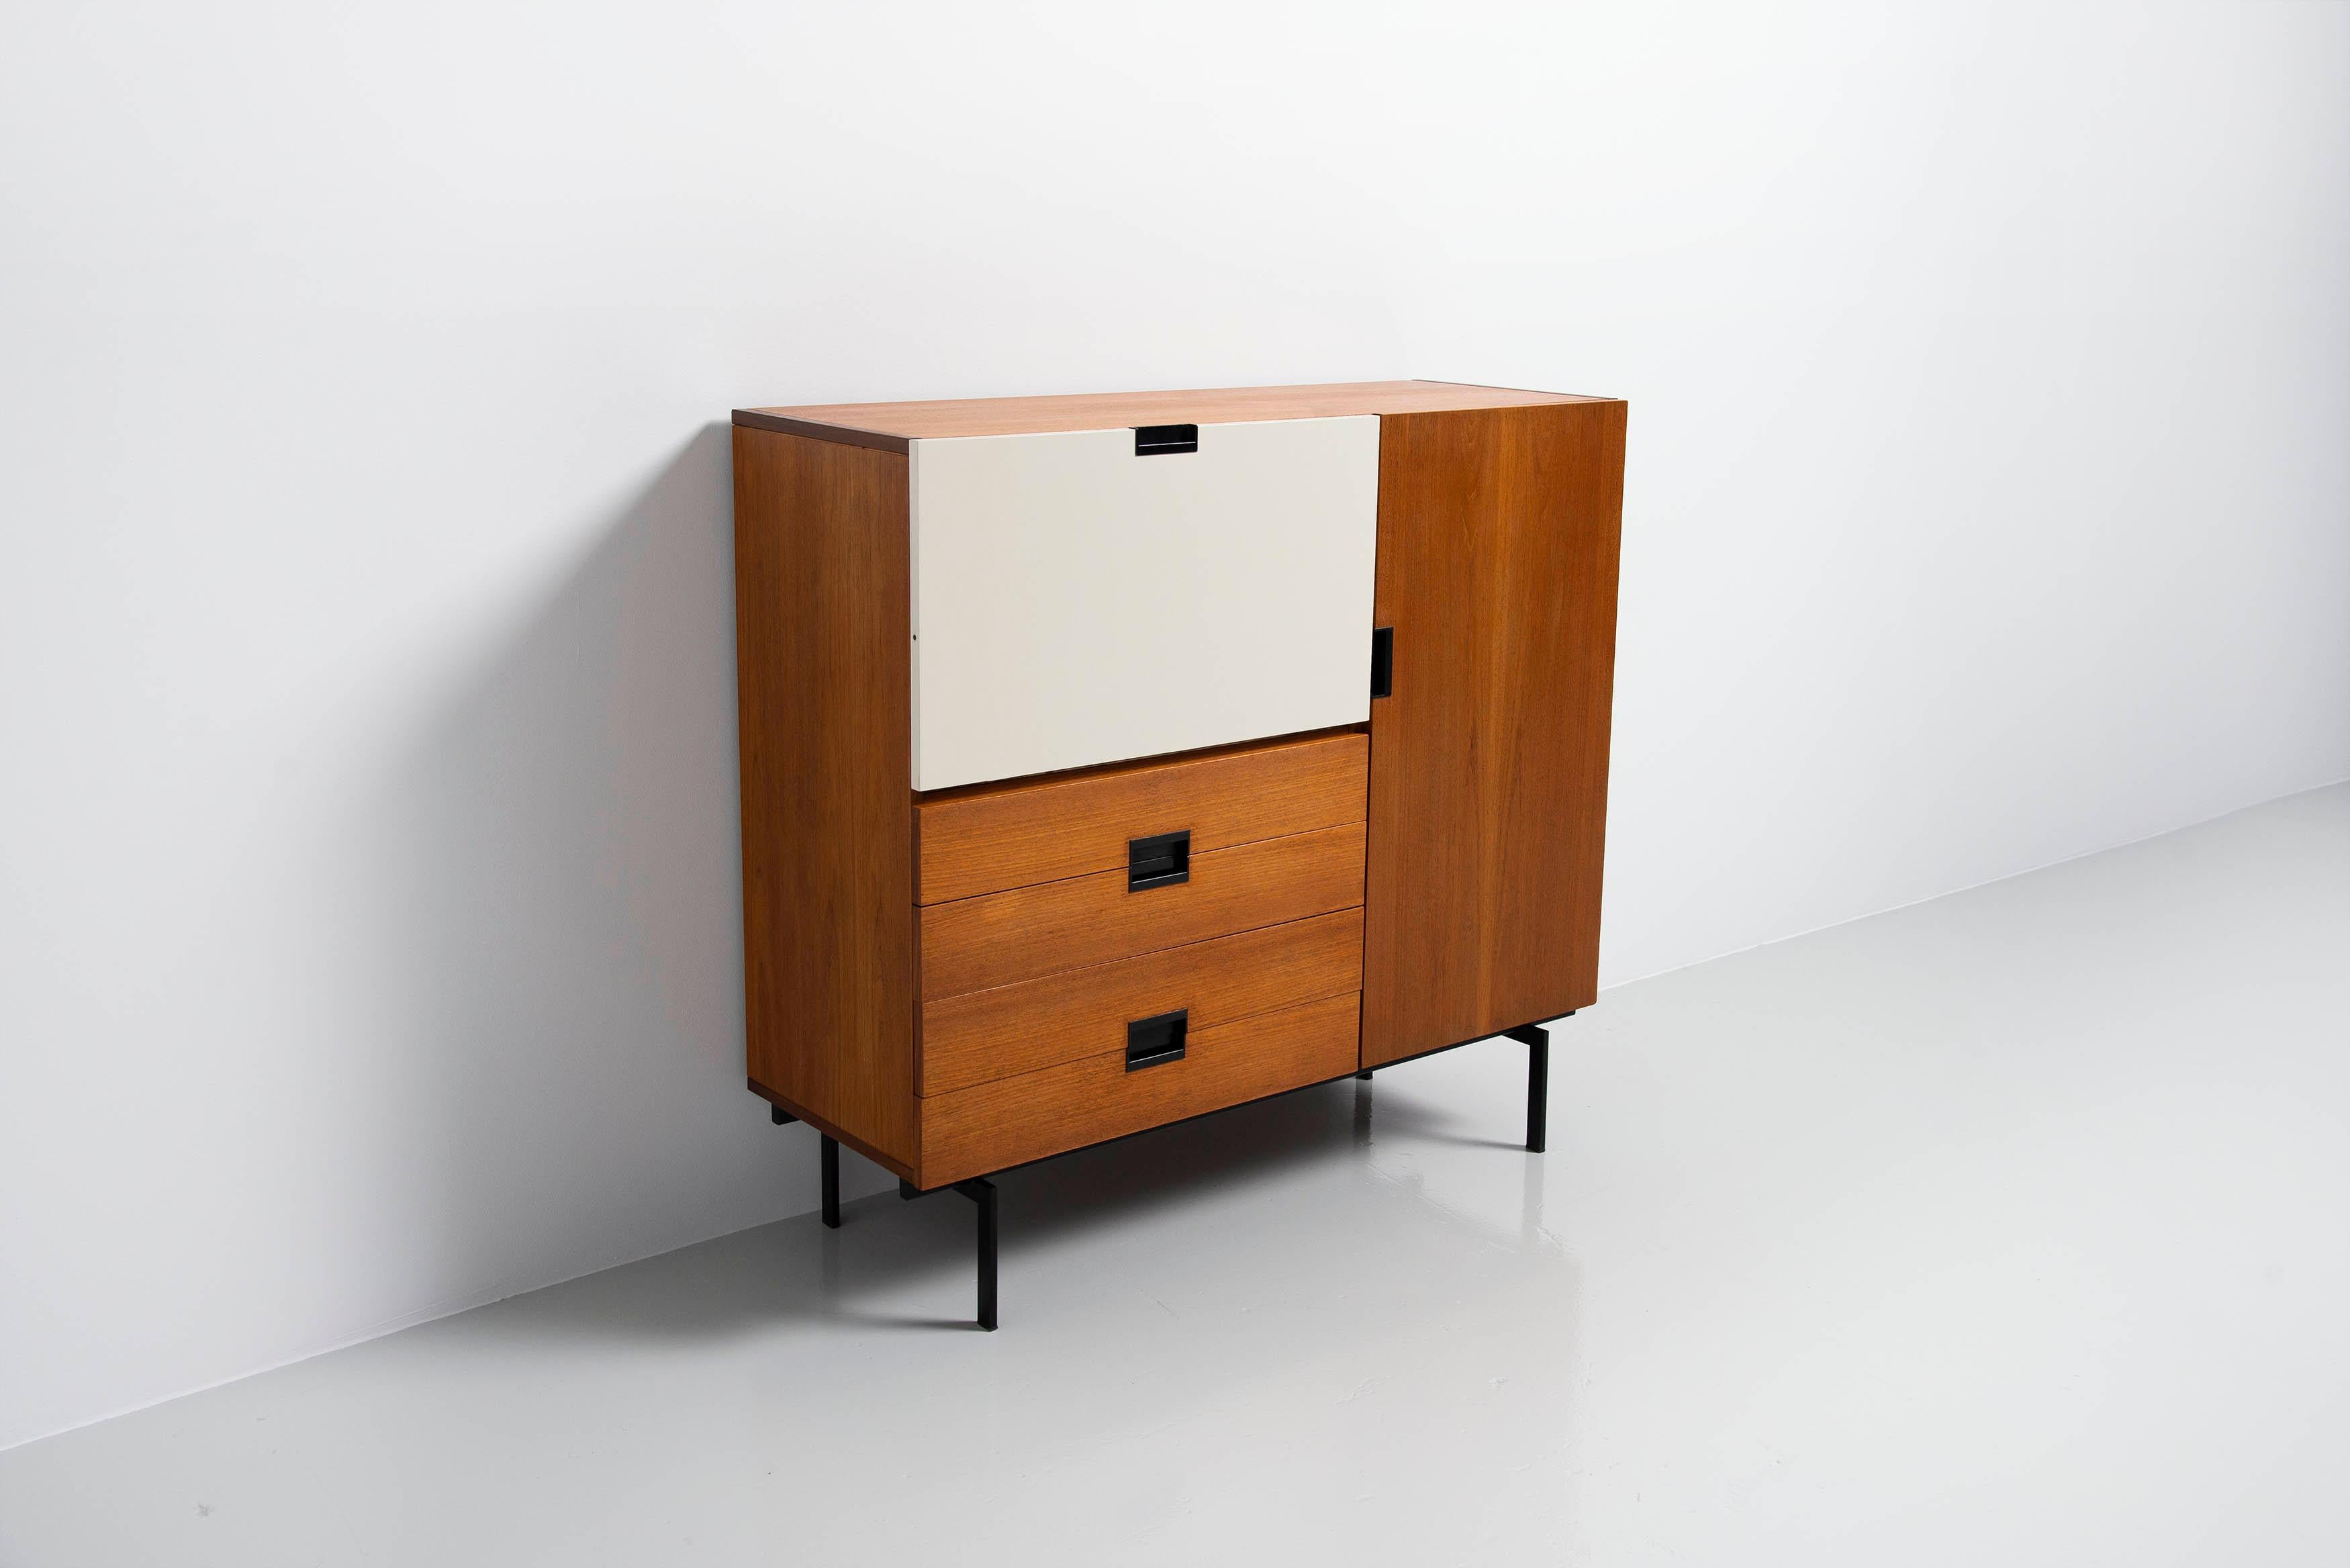 Cold-Painted Cees Braakman CU01 Cabinet Pastoe Holland, 1958